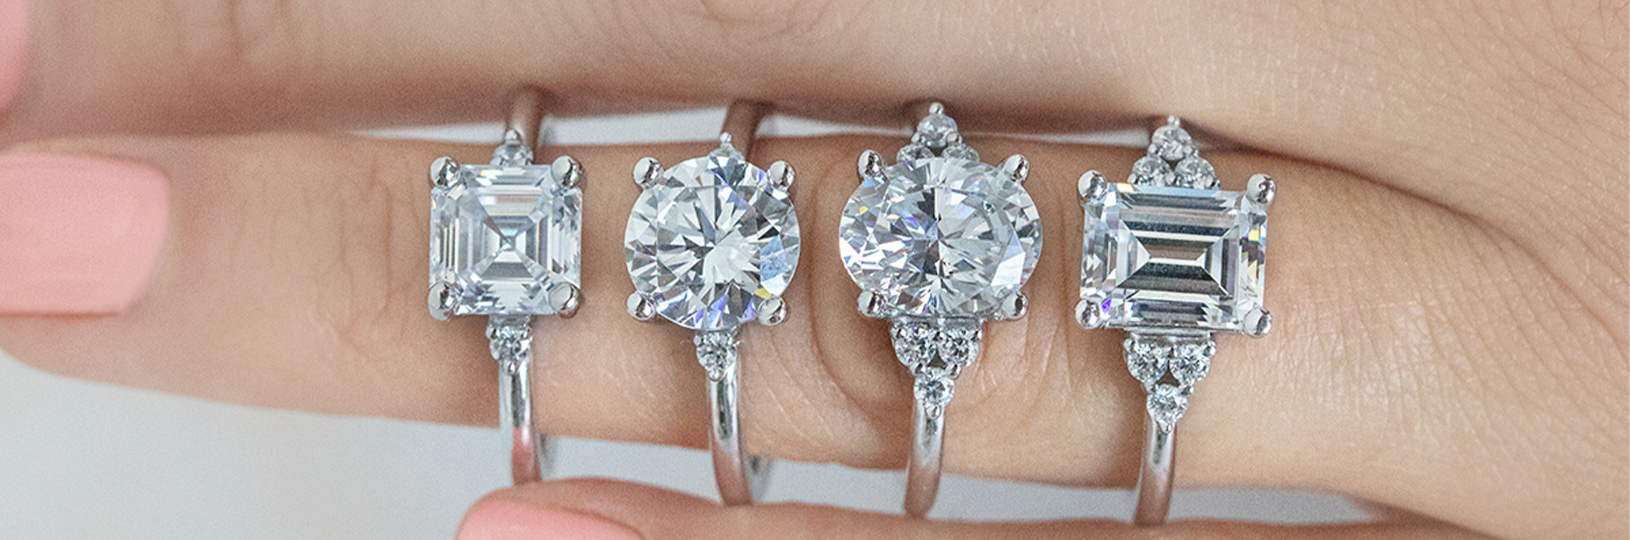 Four different diamond shapes compared side-by-side